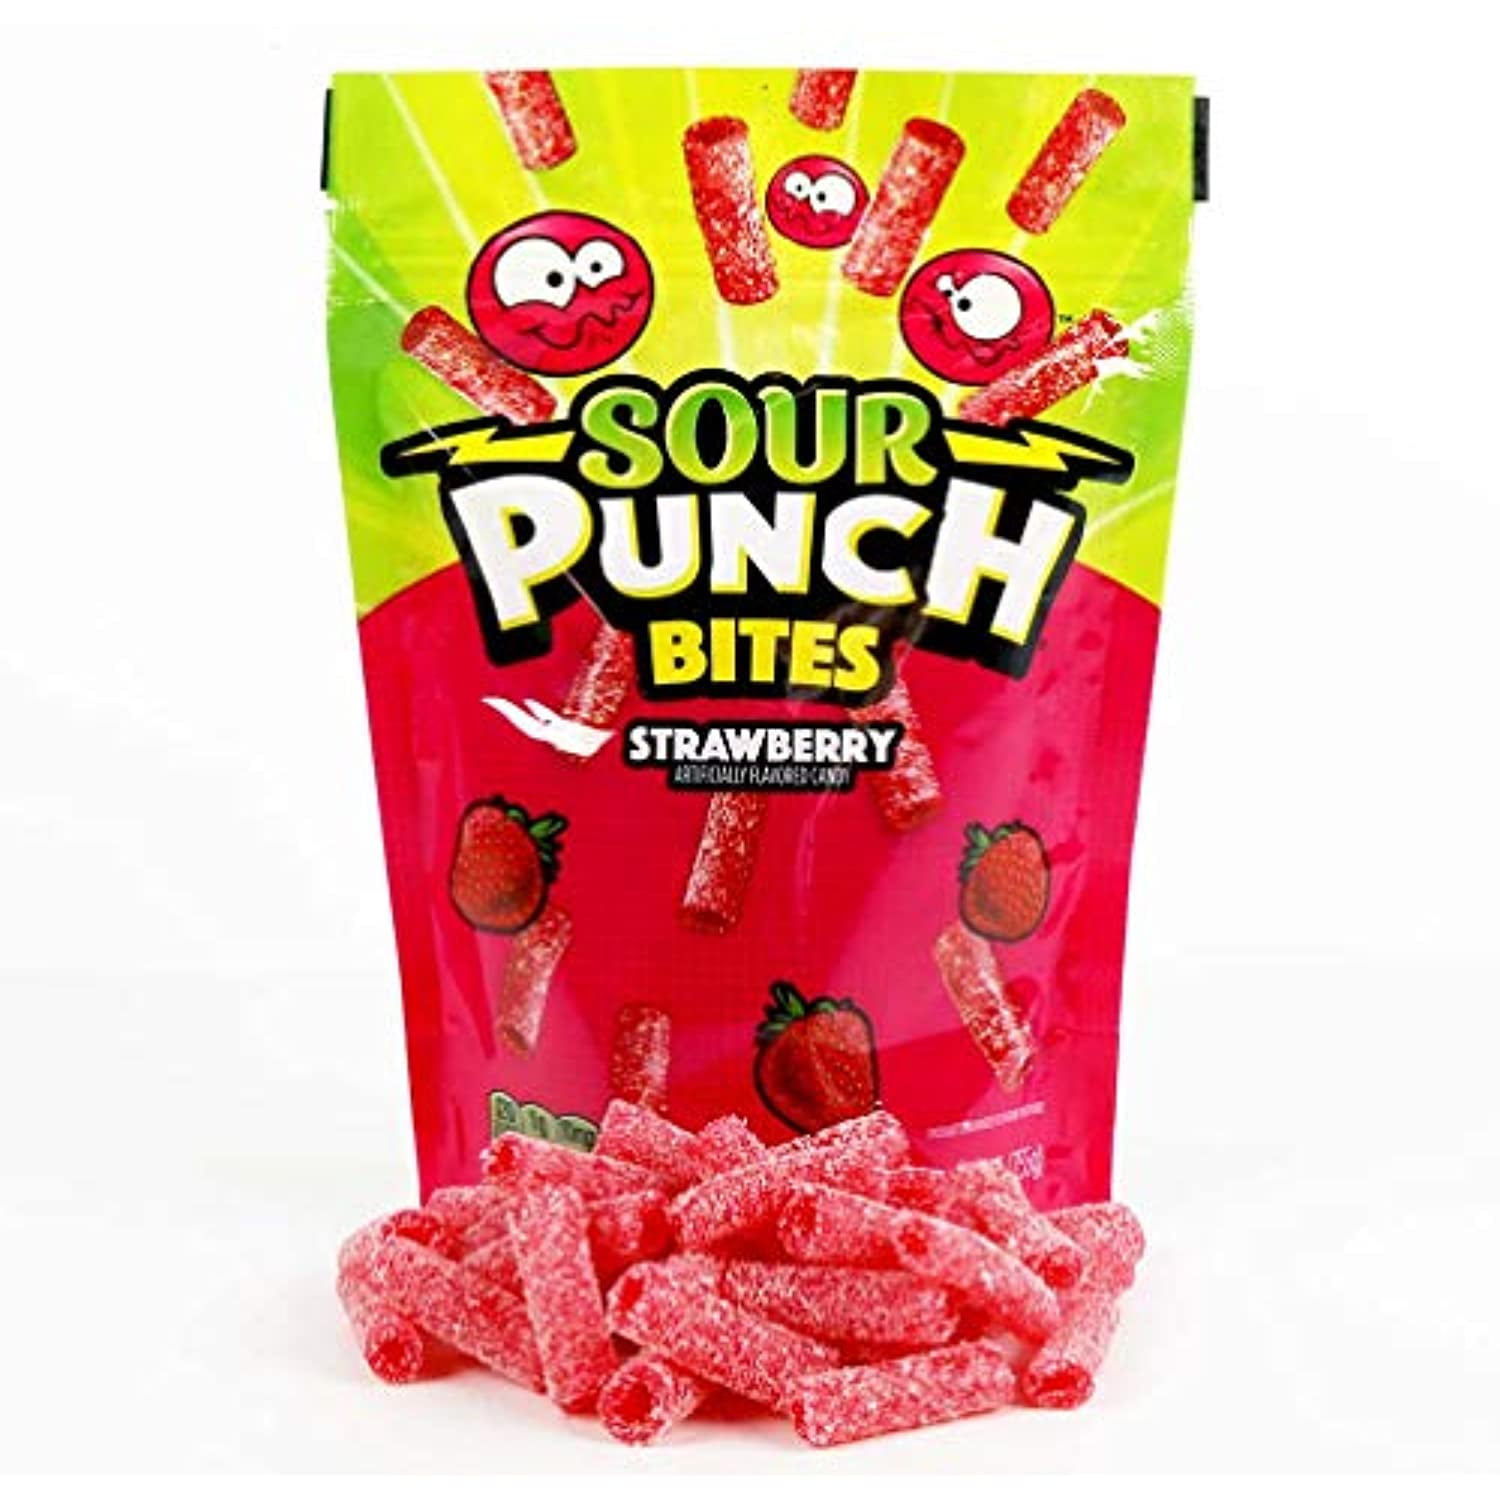 SOUR PUNCH BITES STRAWBERRY FLAVORED CHEWY SOUR CANDY 9oz BAG 